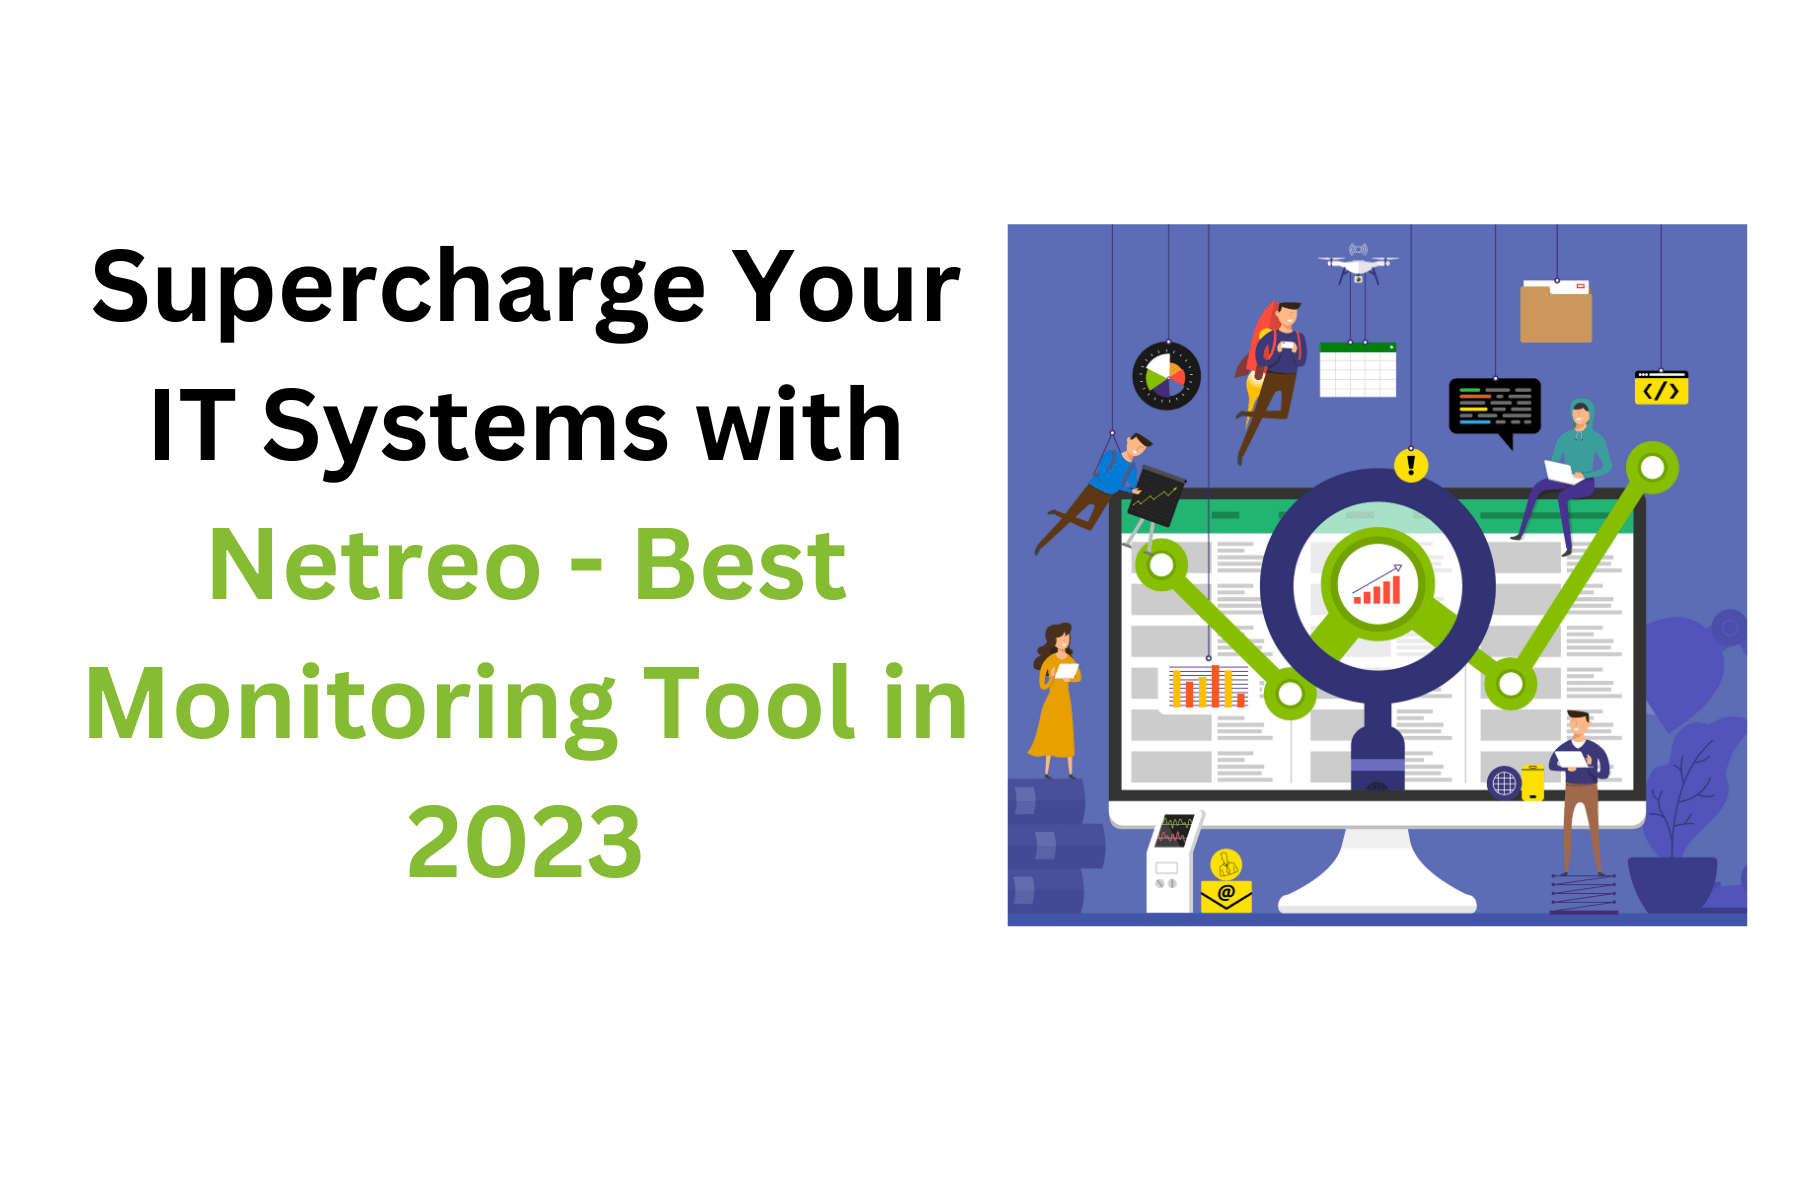 Supercharge Your IT Systems with Netreo Best Monitoring Tool in 2023